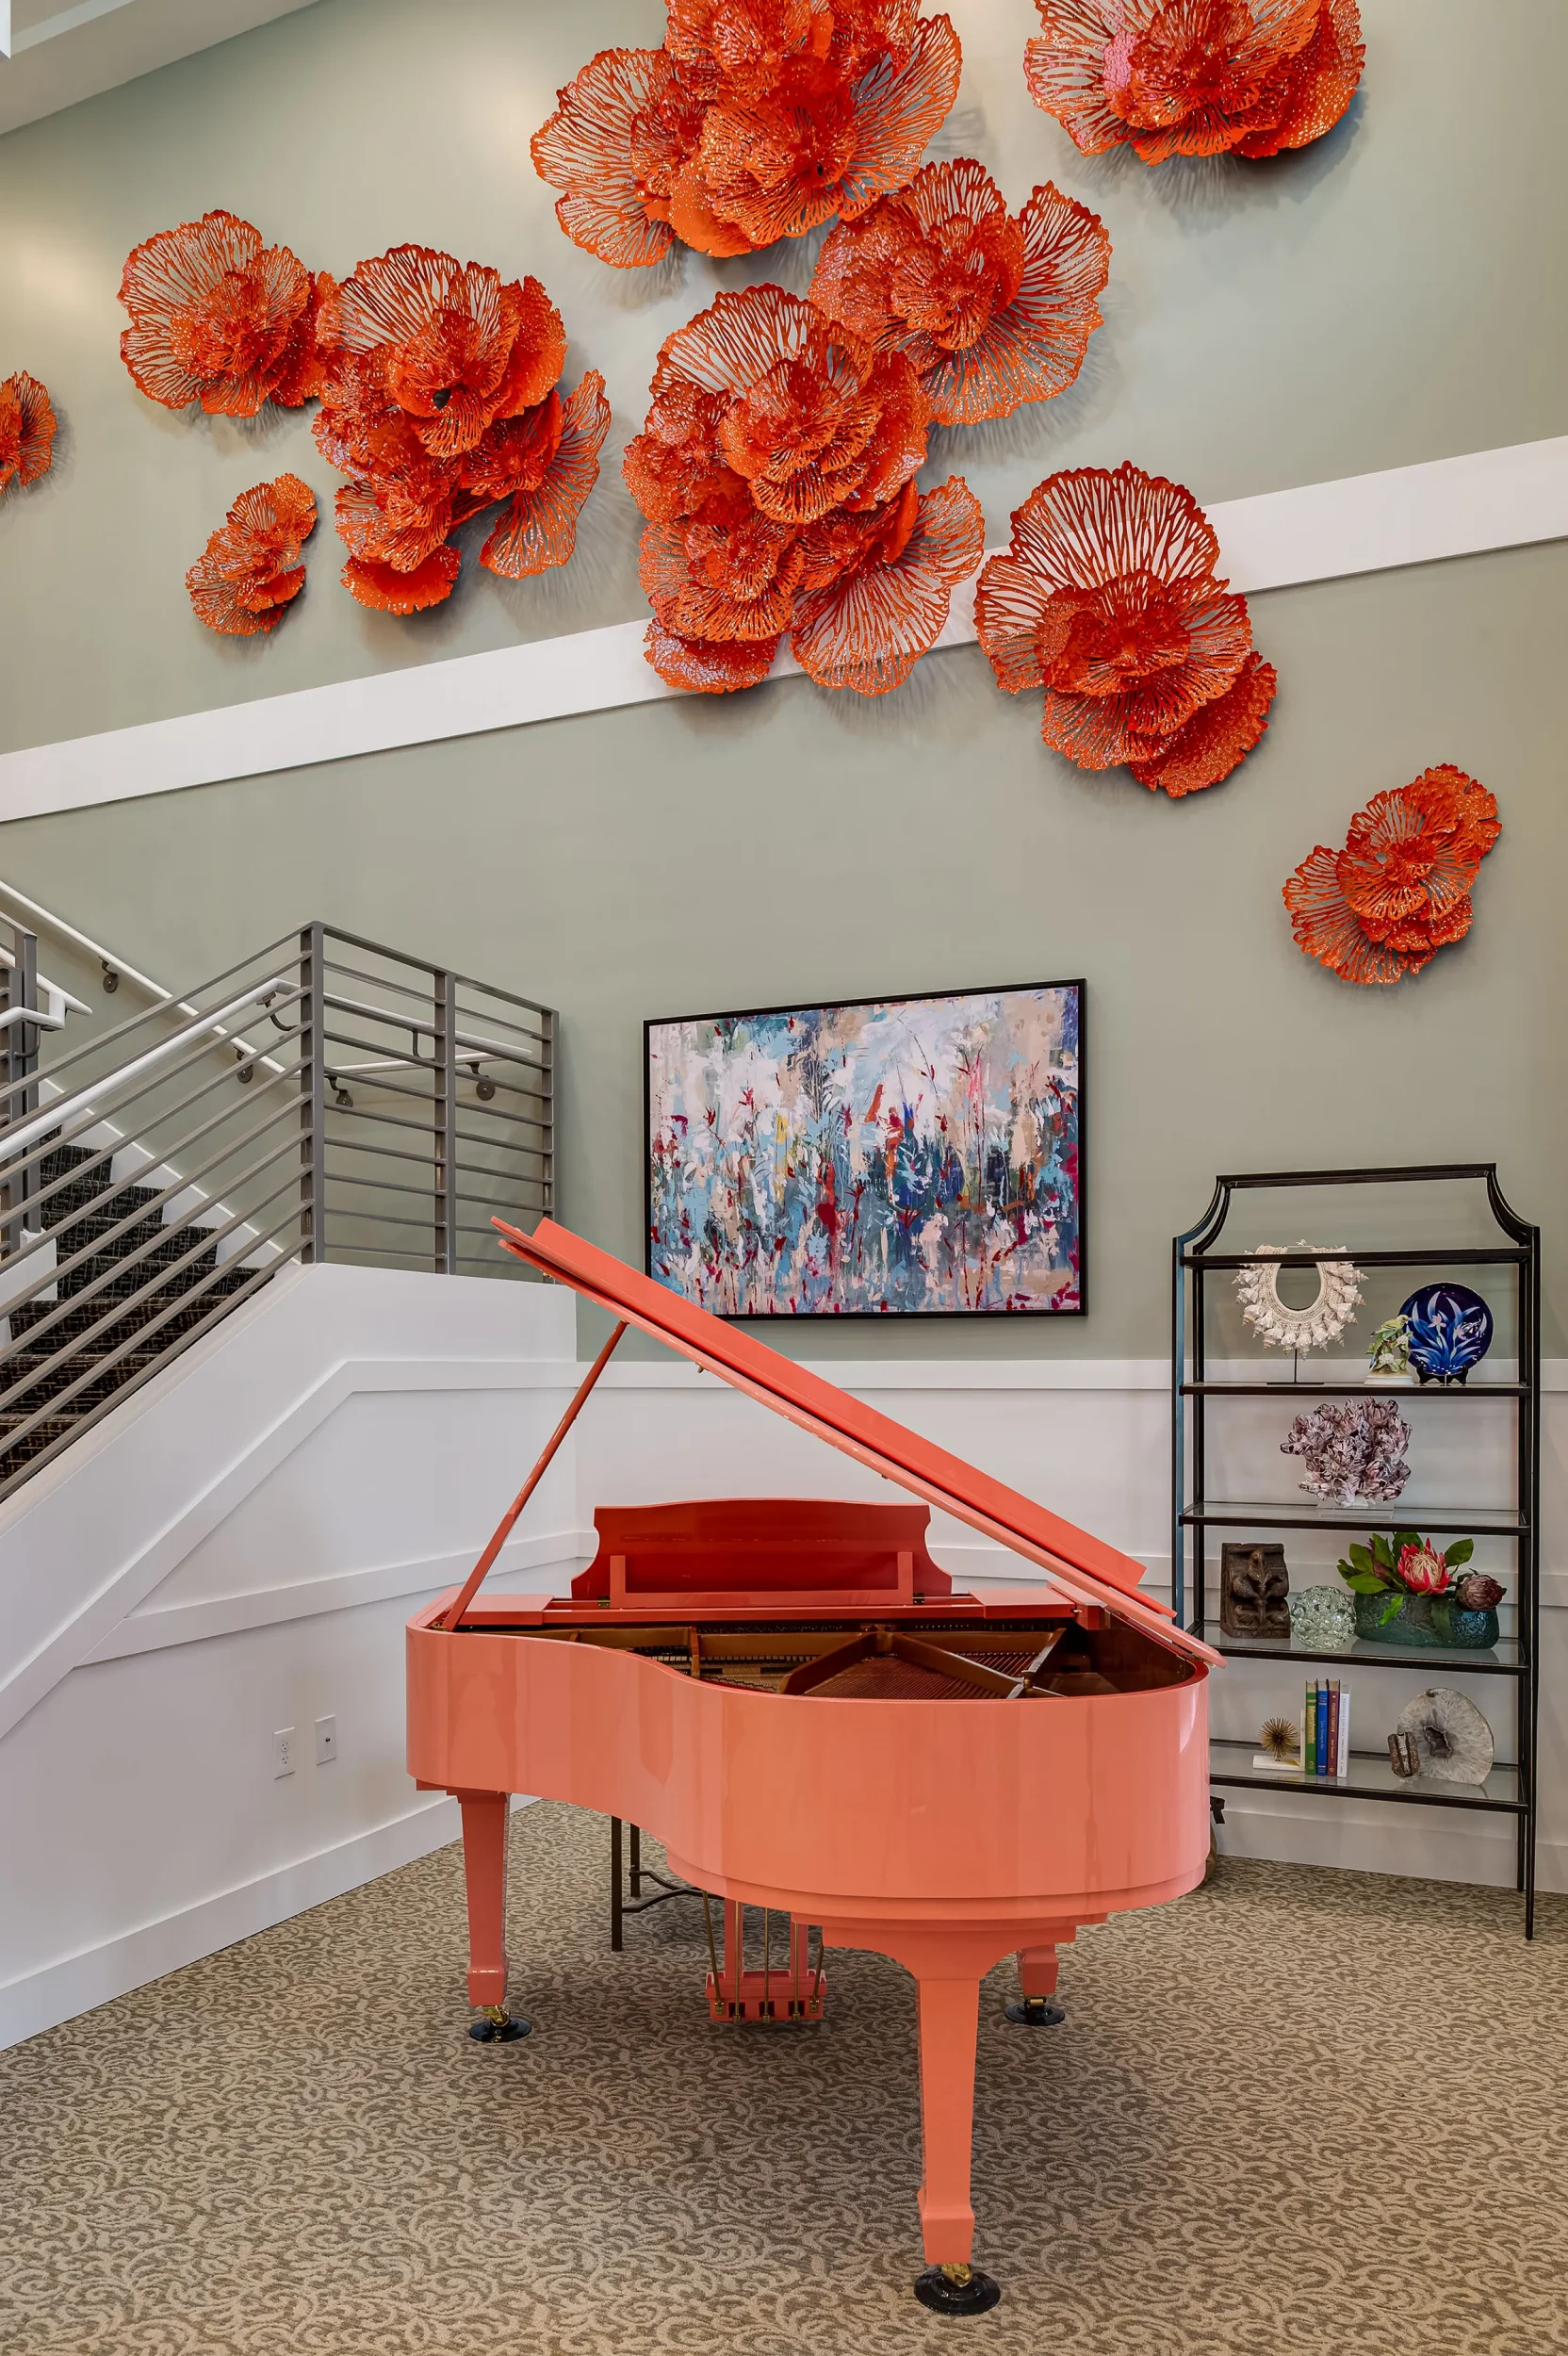 coral colored baby grand piano with large floral art on walls